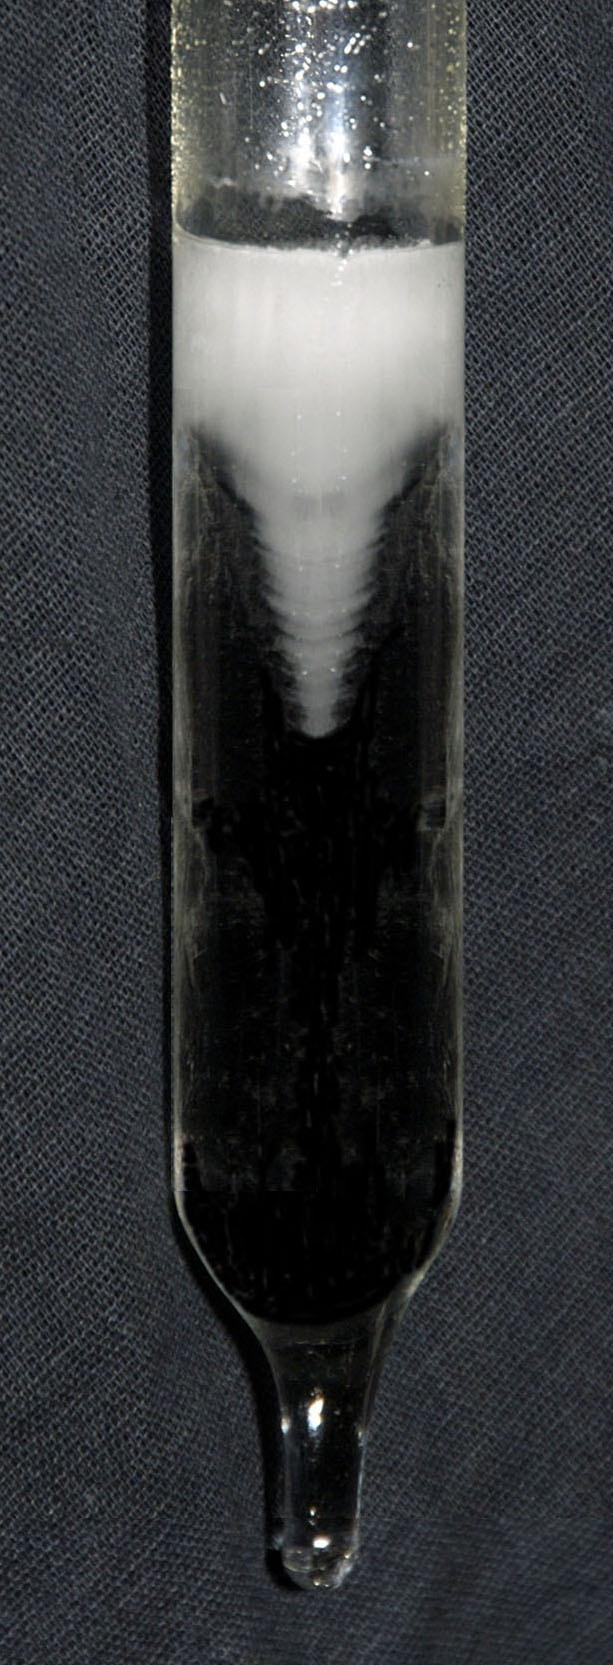 The method based on measuring the length of the opaque part of the ice ingot (Fig. 1), obtained by means of low-temperature directed crystallization (LTDC).